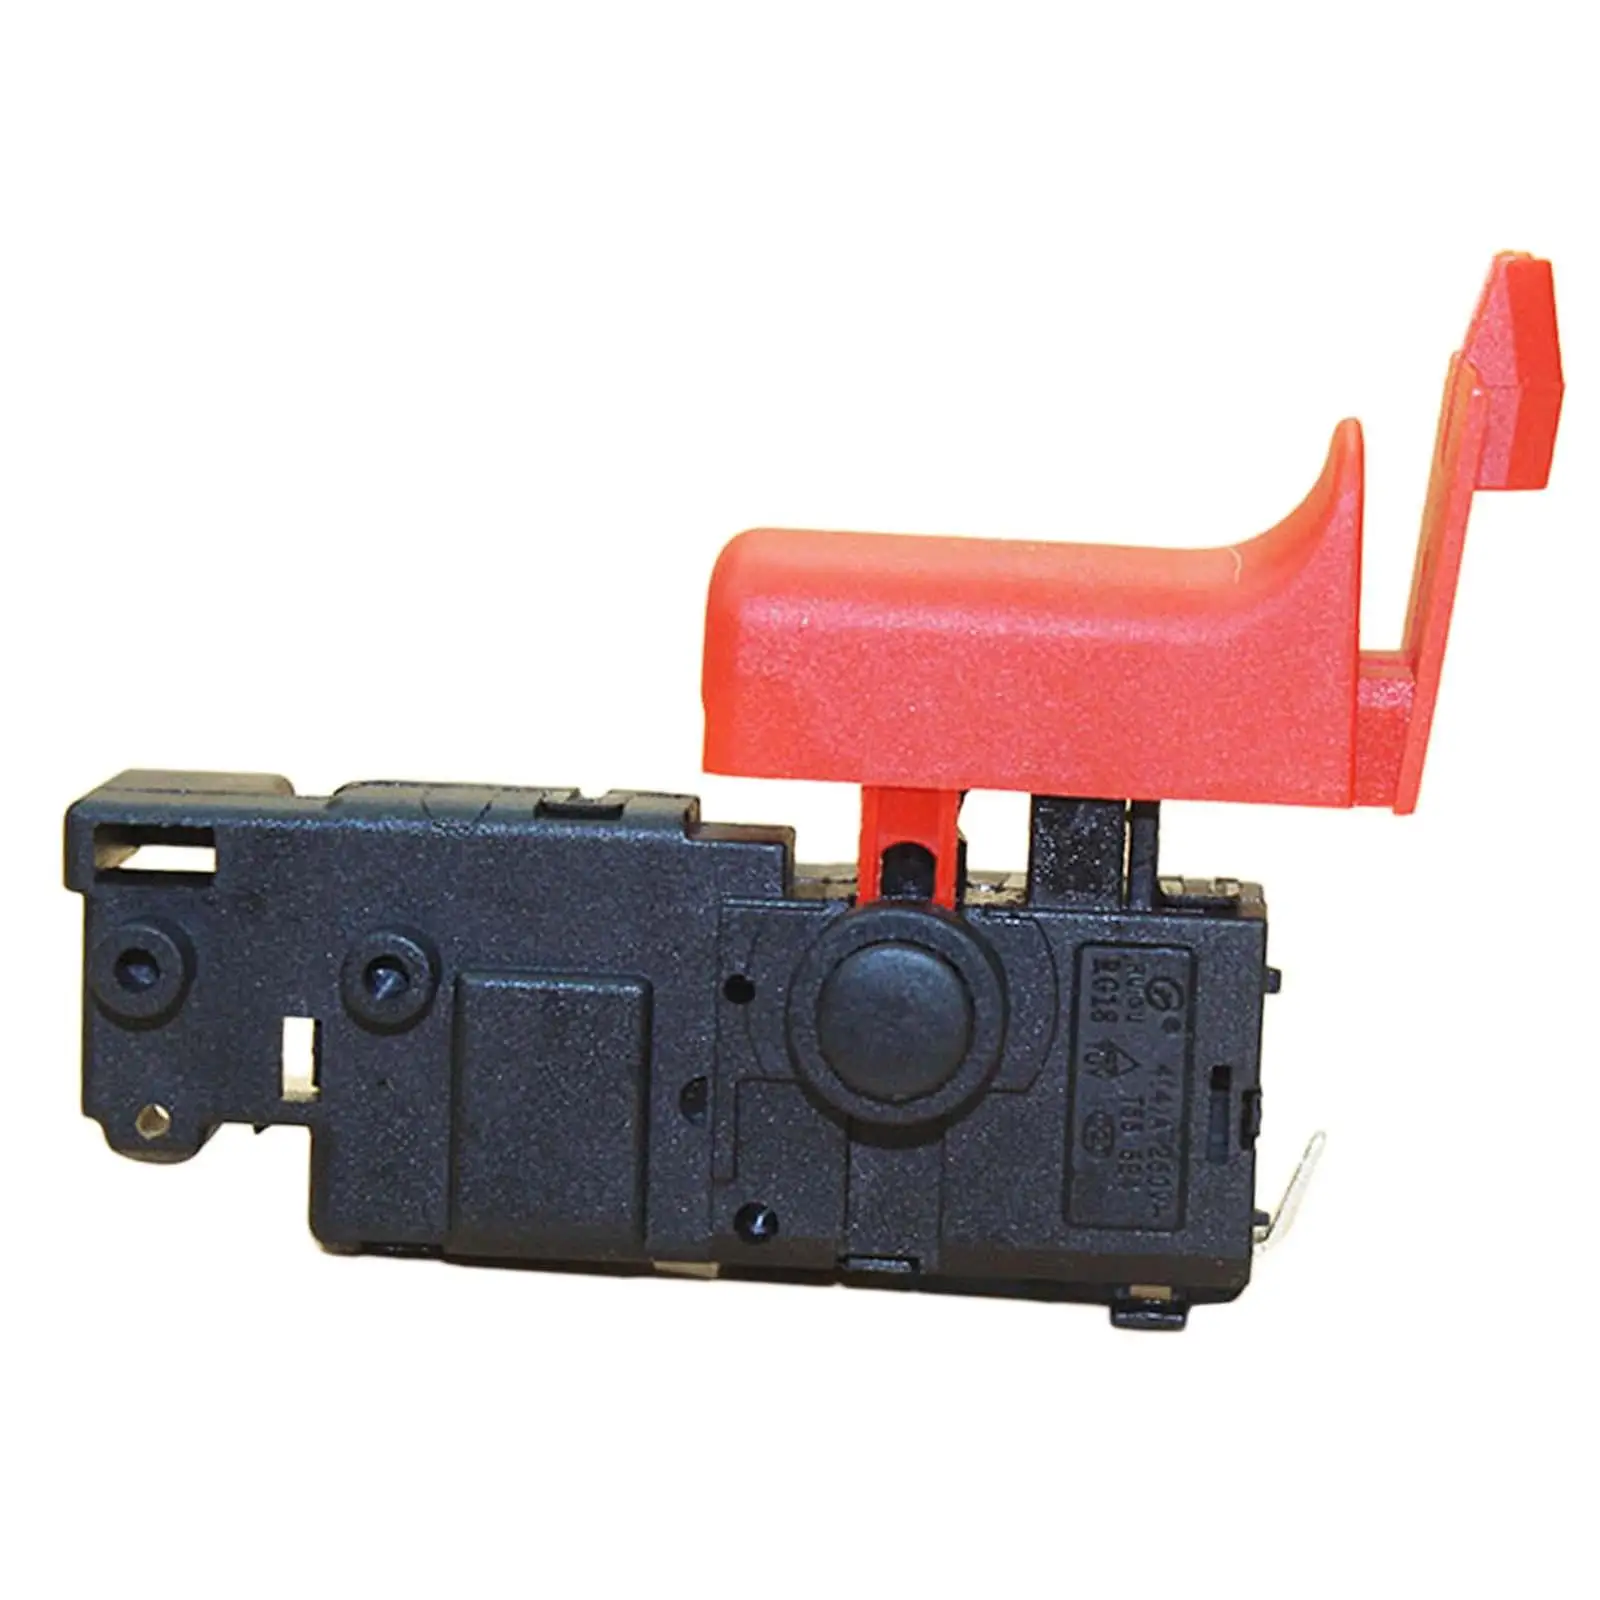 Professional Rotory Hammer Switch Hammer Replacement Control Power Tools Supplies Switch Replacement Rotary for Gbh 2-28 D/22/26